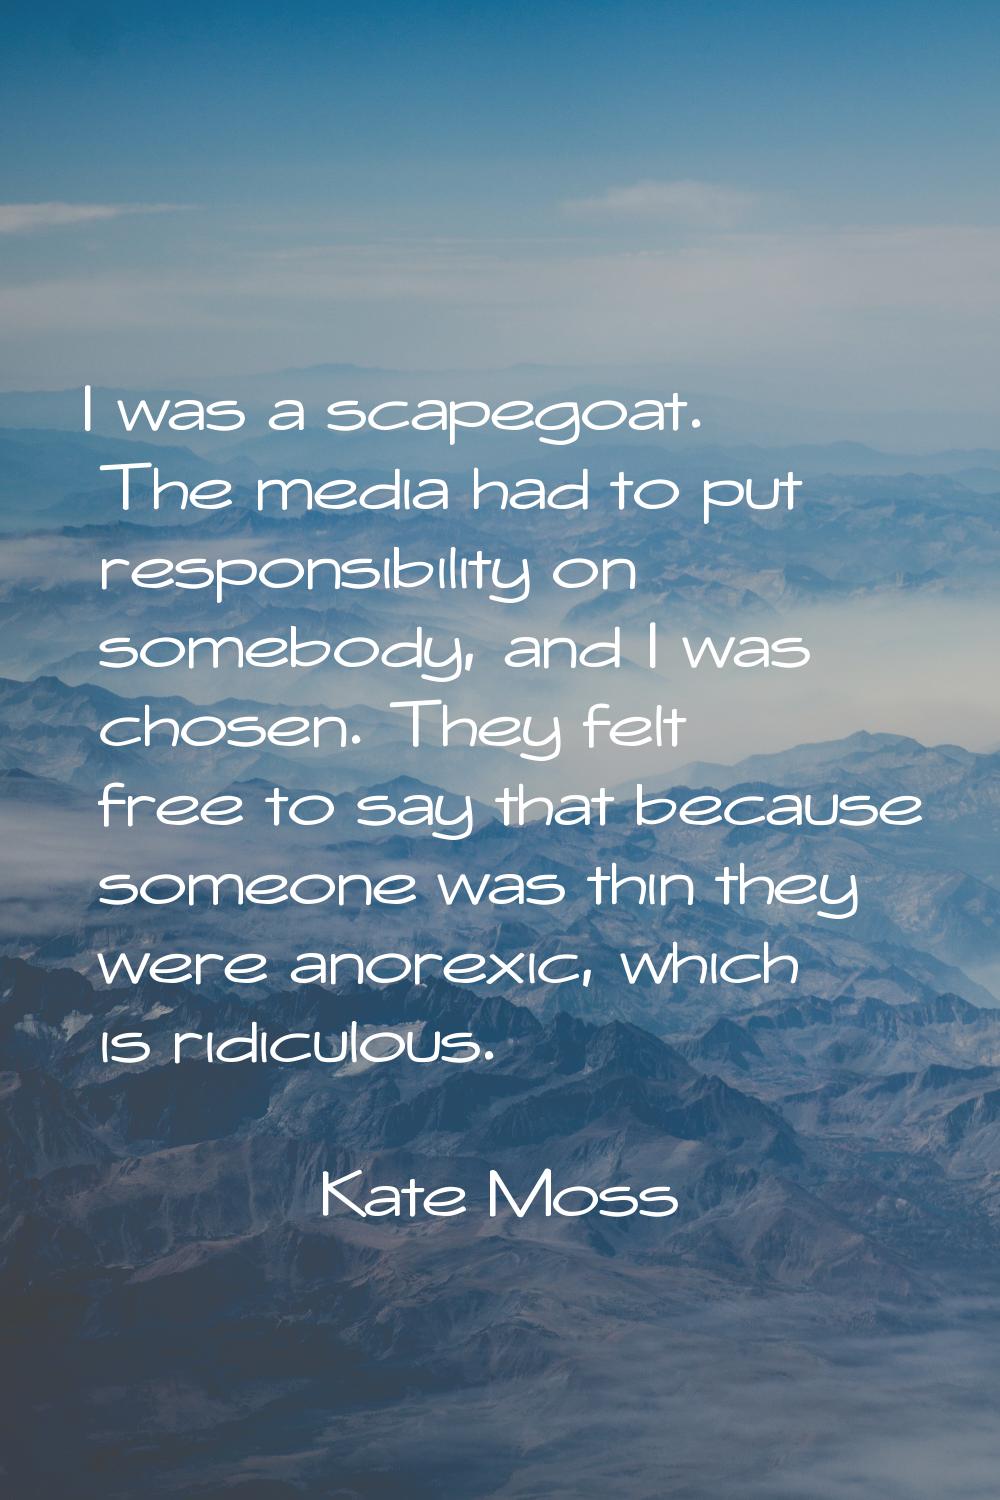 I was a scapegoat. The media had to put responsibility on somebody, and I was chosen. They felt fre